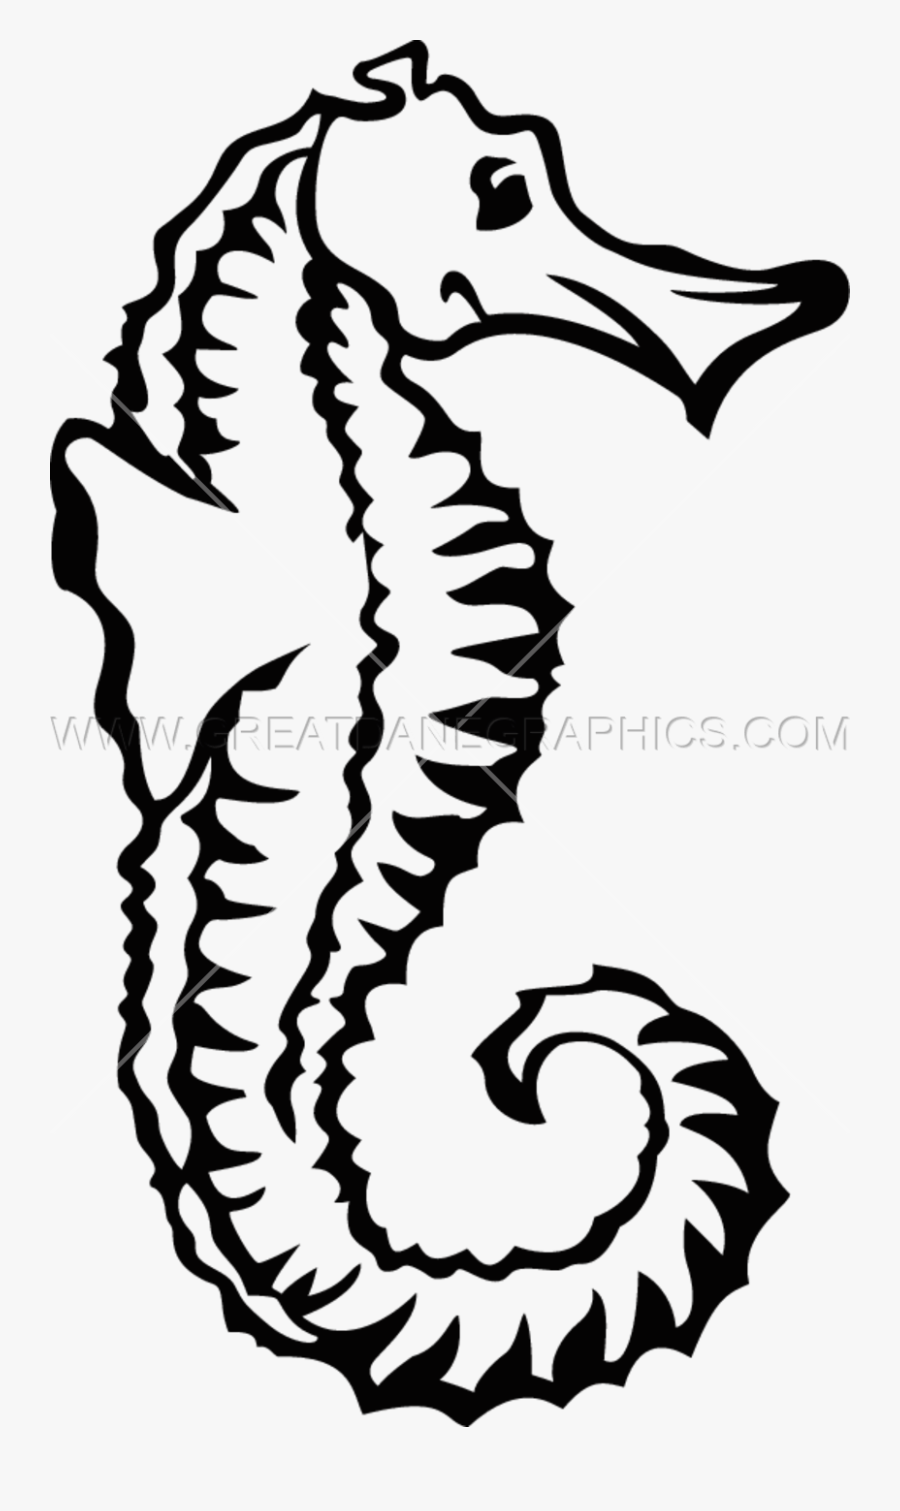 Transparent Seahorse Clipart - Black And White Pictures Of Sea Horse, Transparent Clipart